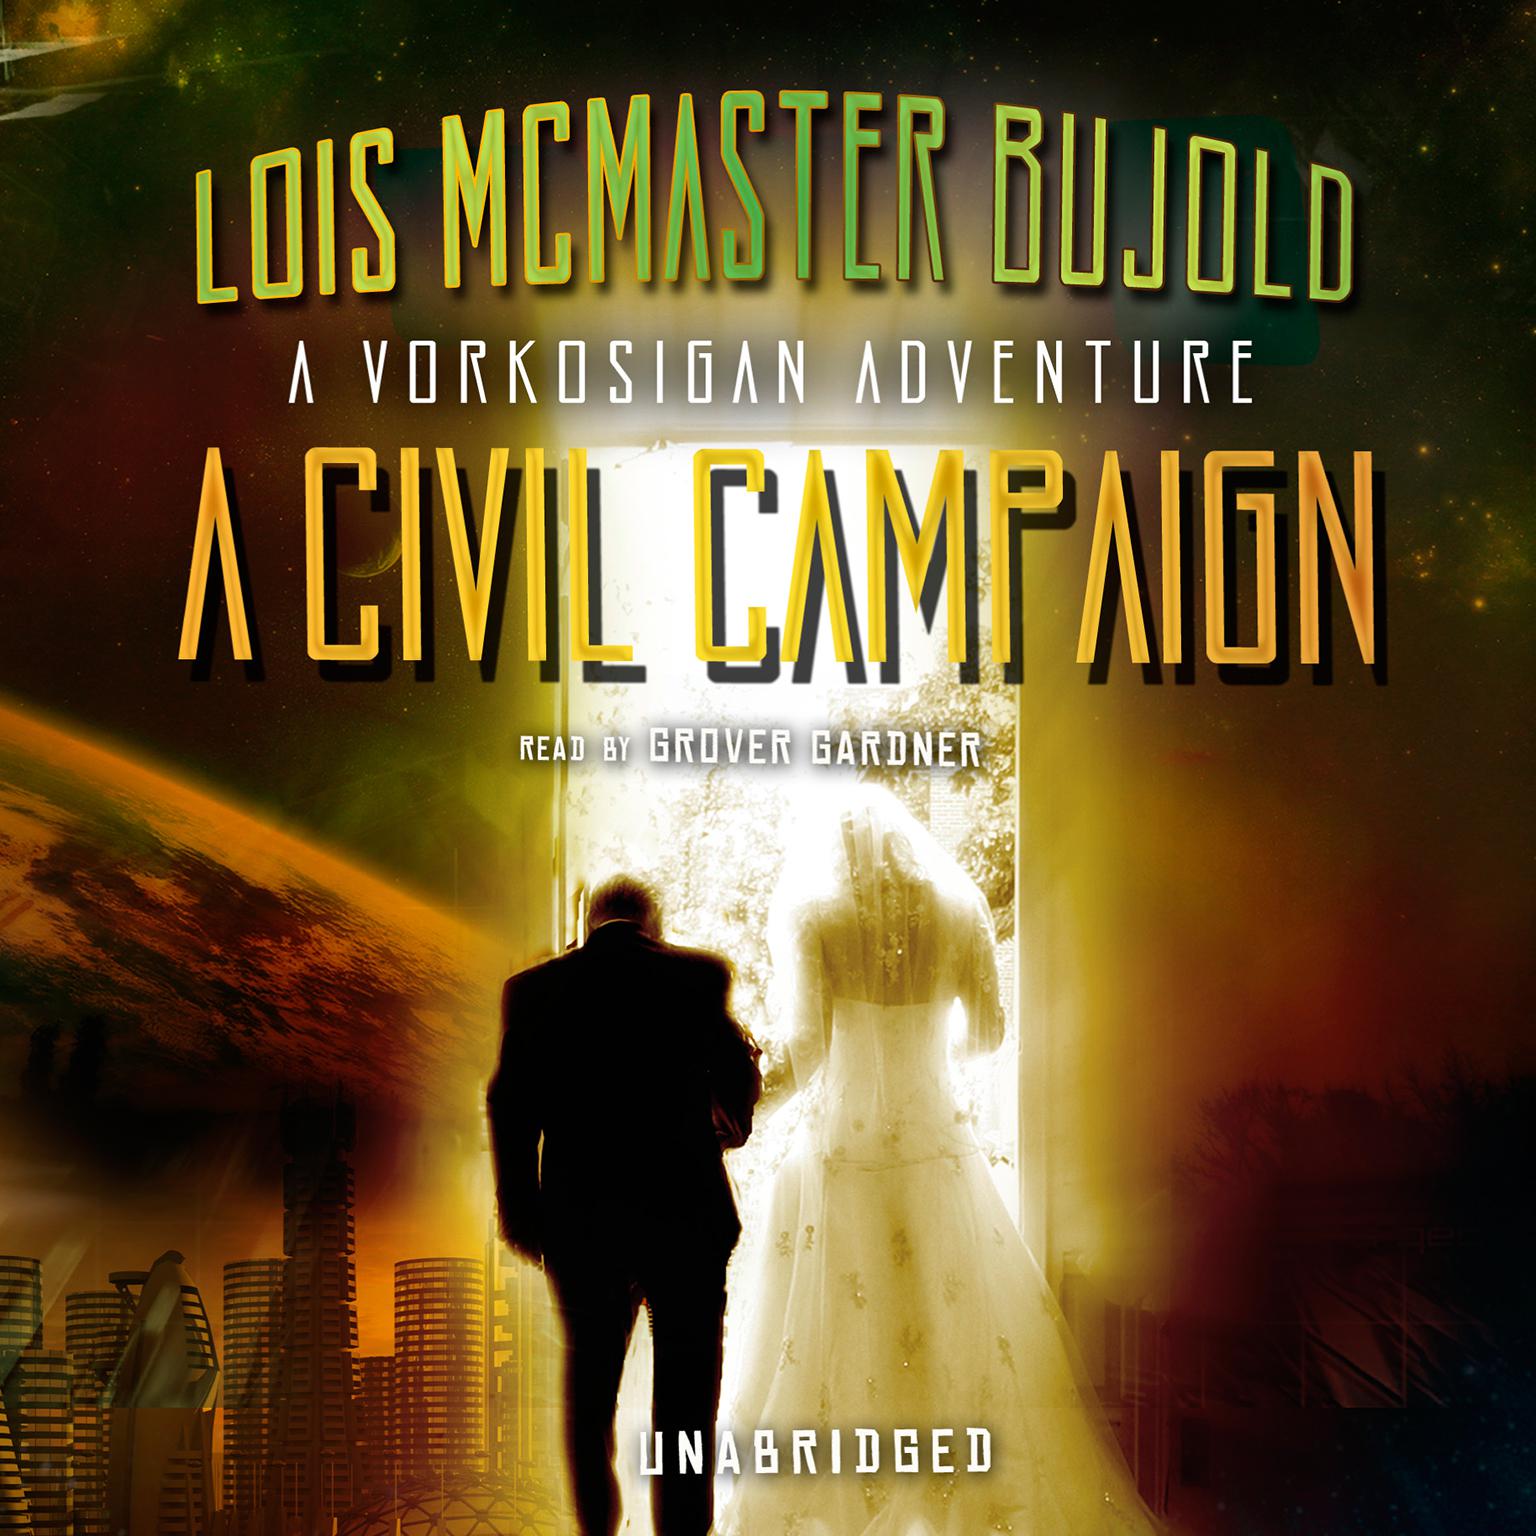 A Civil Campaign: A Comedy of Biology and Manners Audiobook, by Lois McMaster Bujold